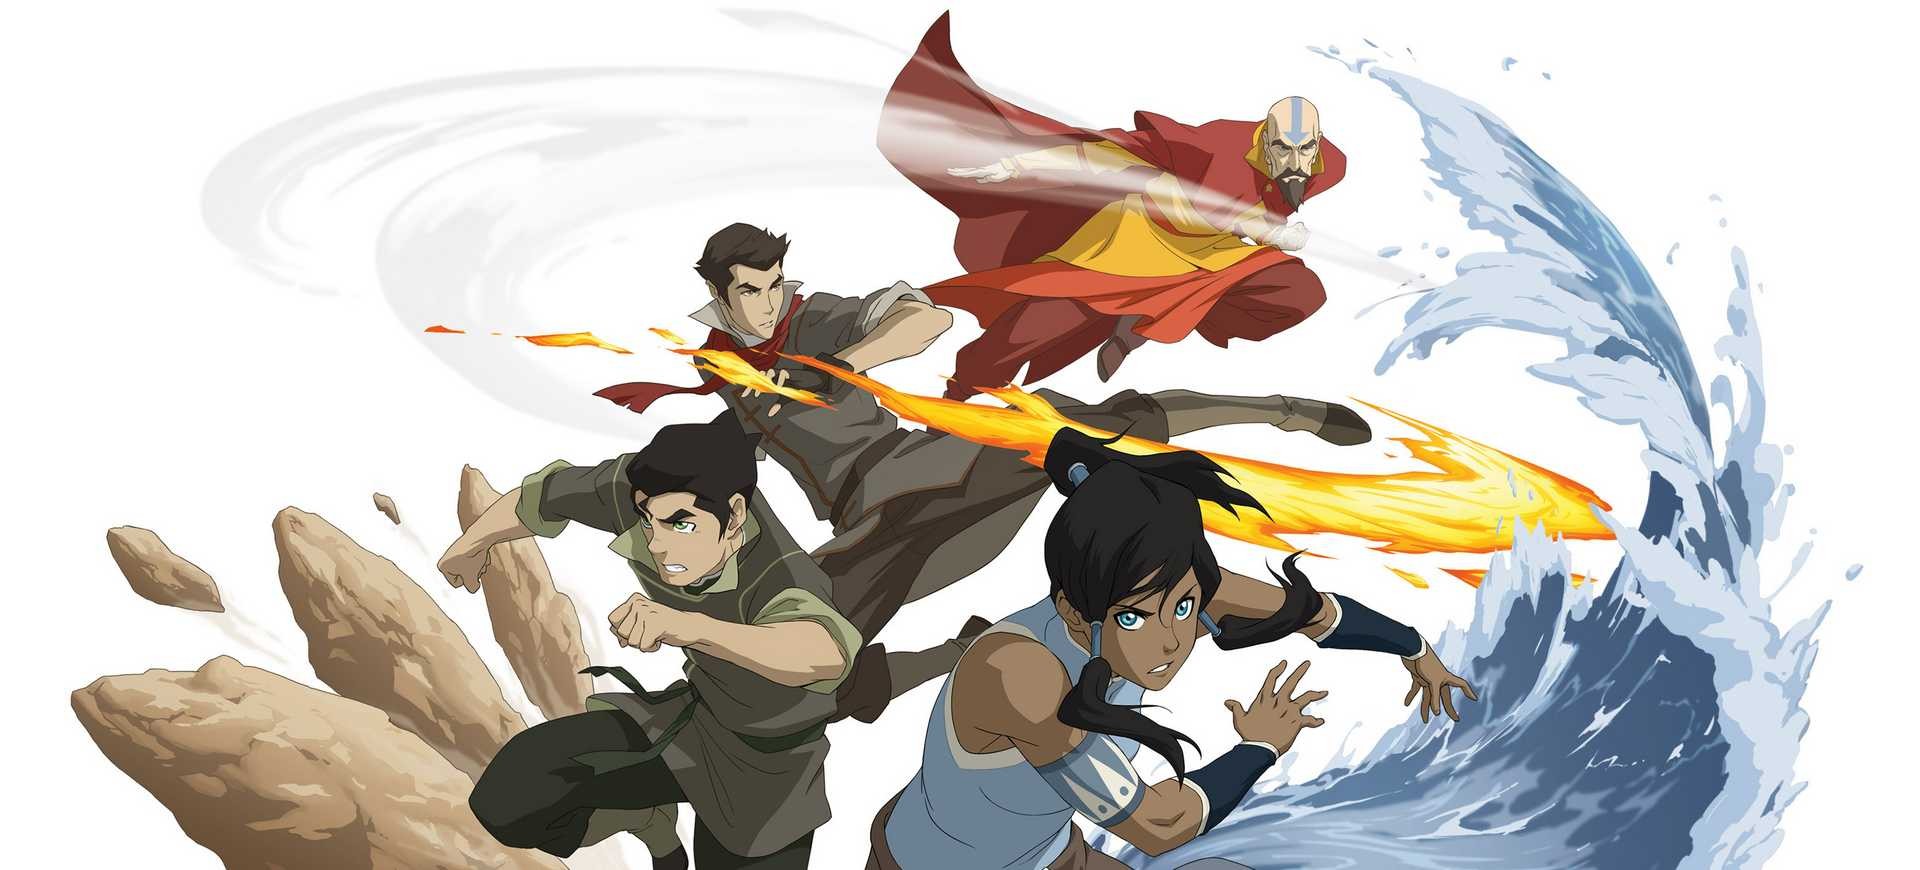 Avatar The Last Airbender gets another shot at video games in an unlikely  place  Polygon